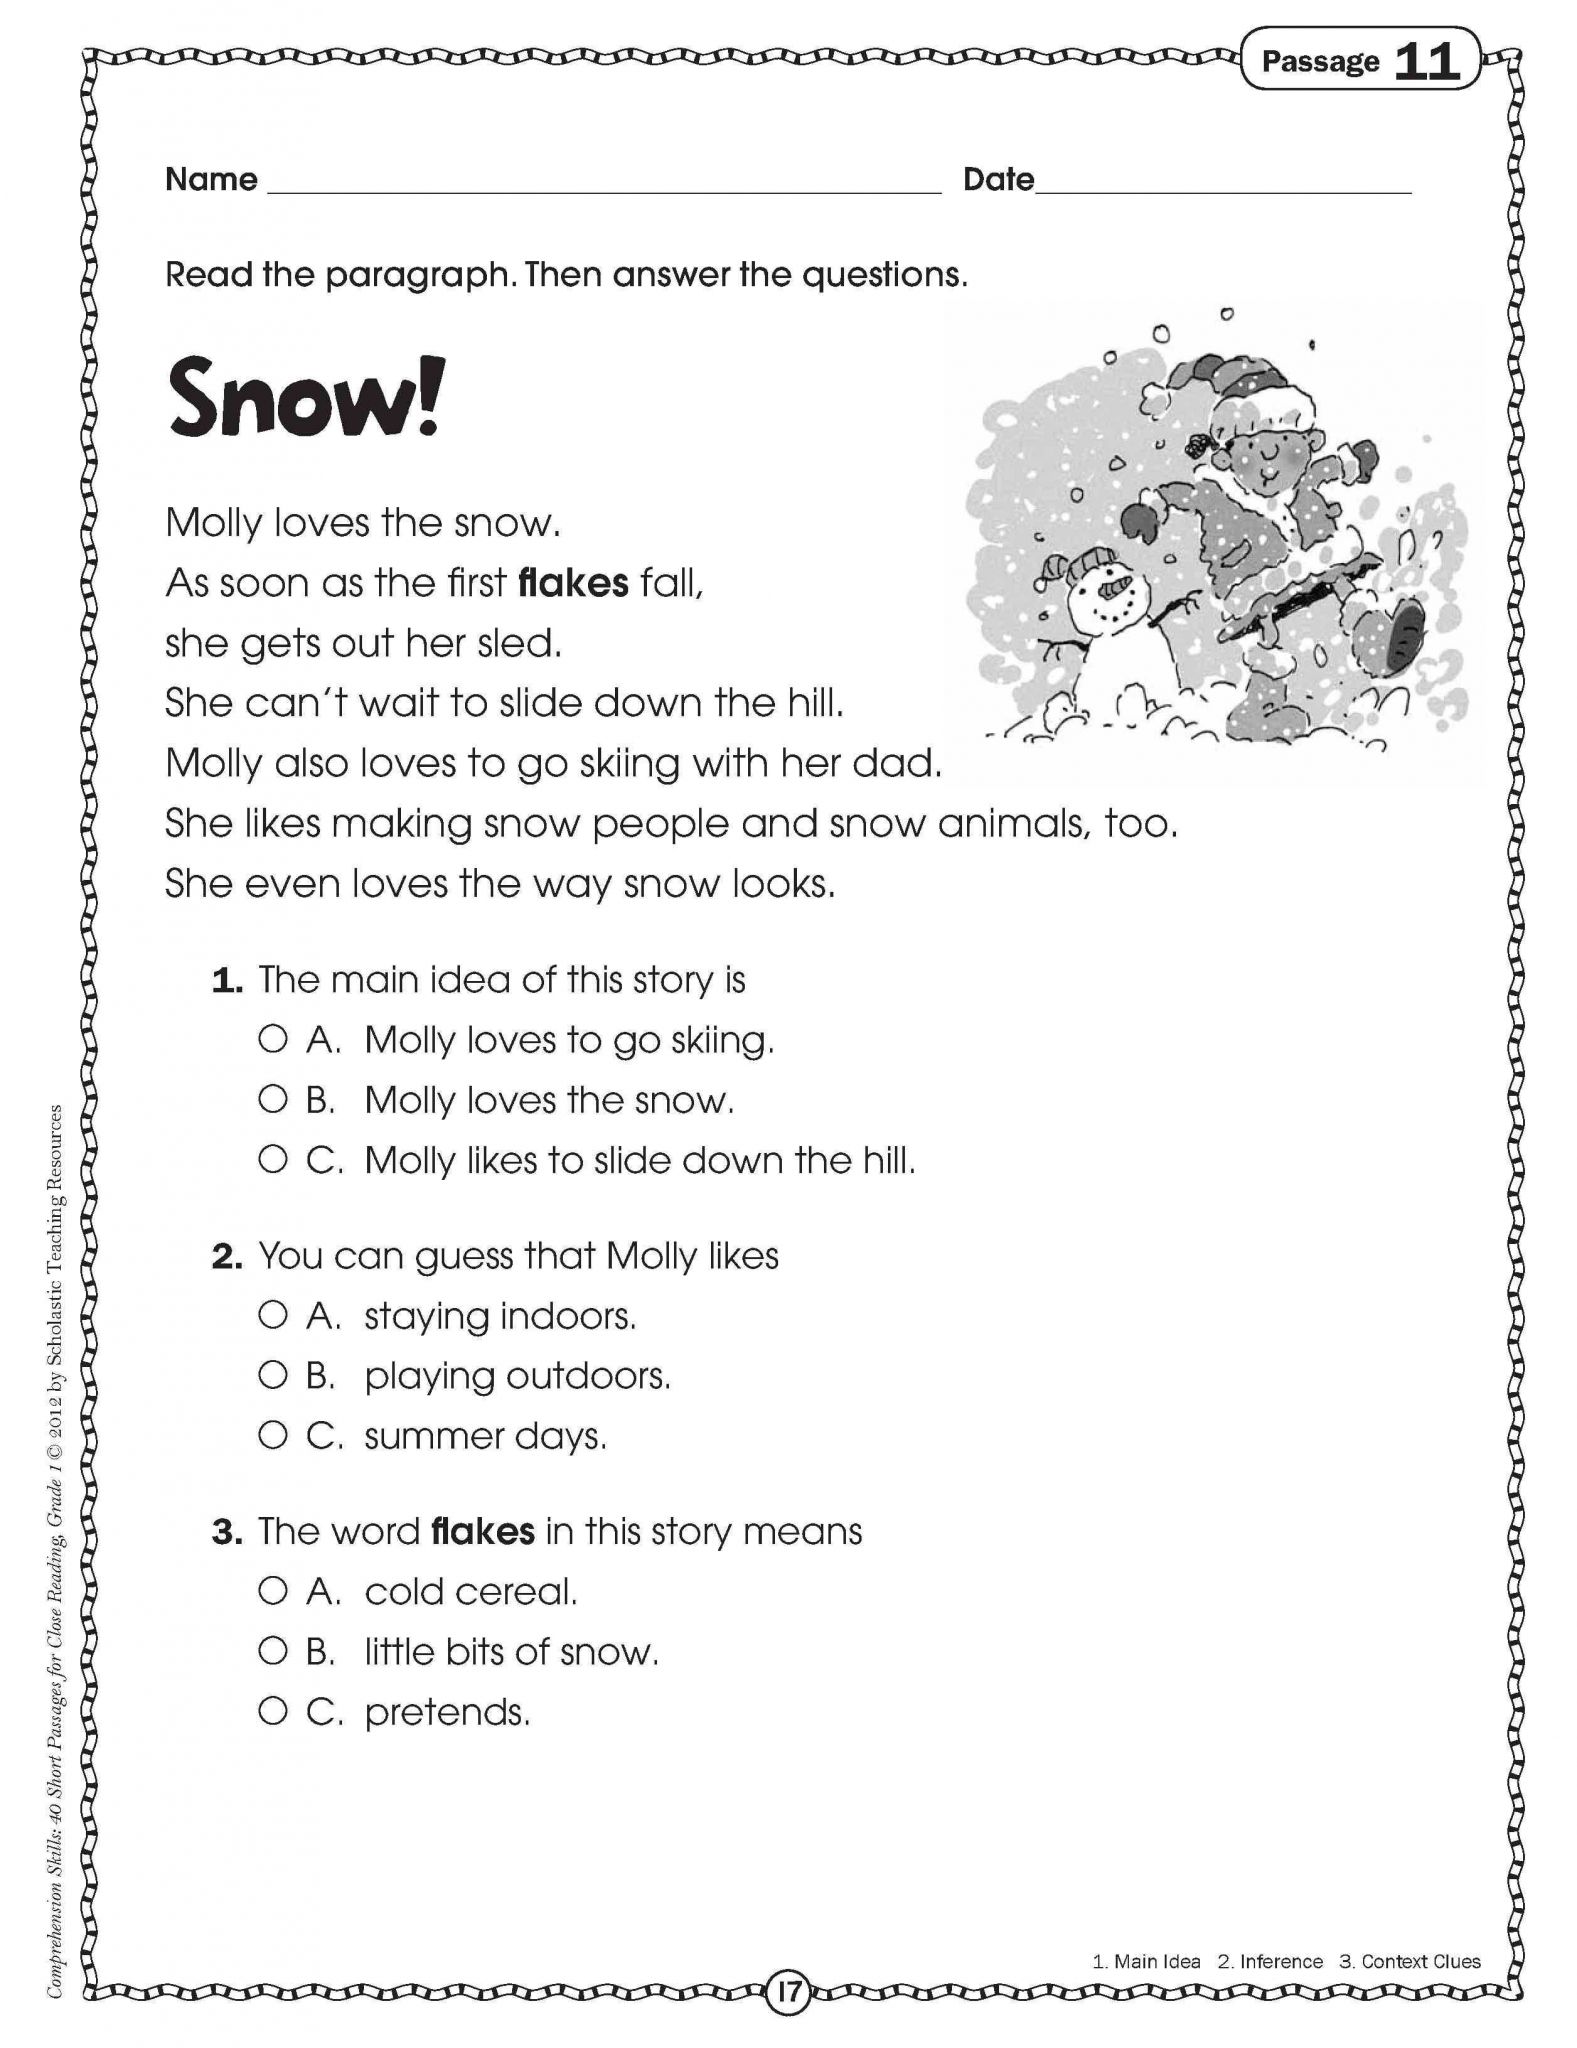 English Worksheets Exercises as Well as English Worksheets About Christmas Beautiful Guess the Christmas